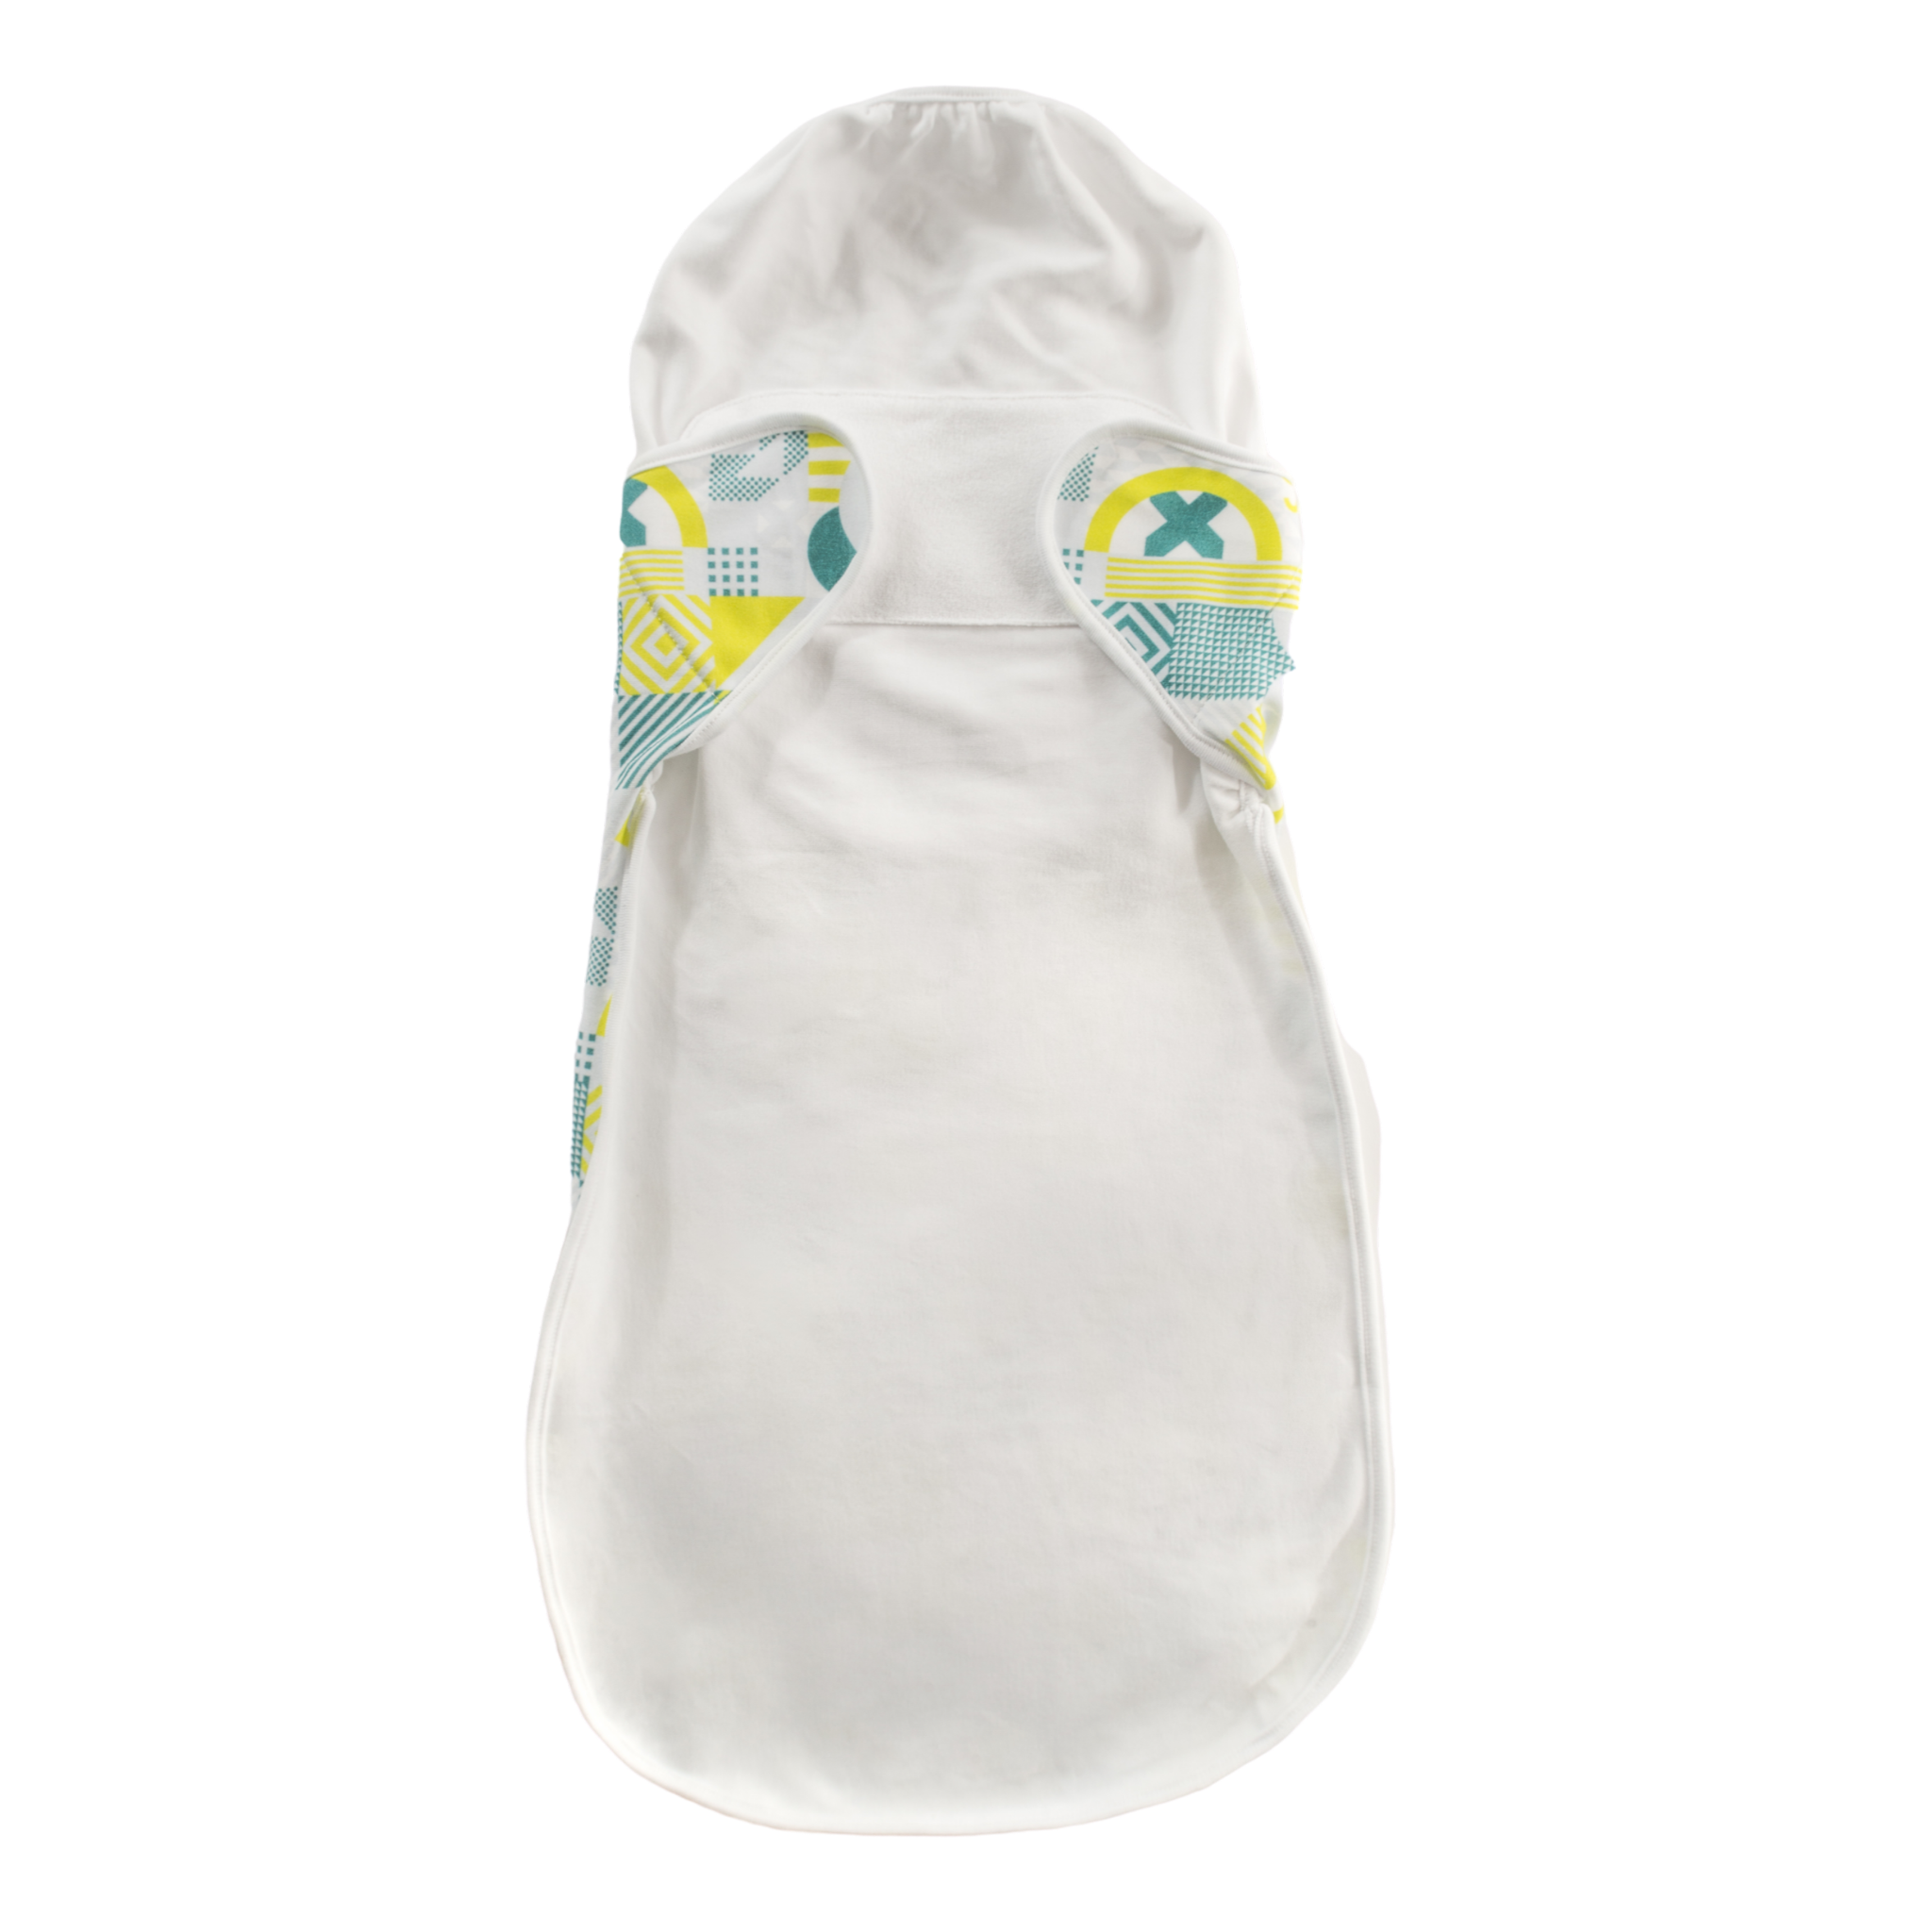 Swaddle Organic Cotton, Lollypop - Limited Edition